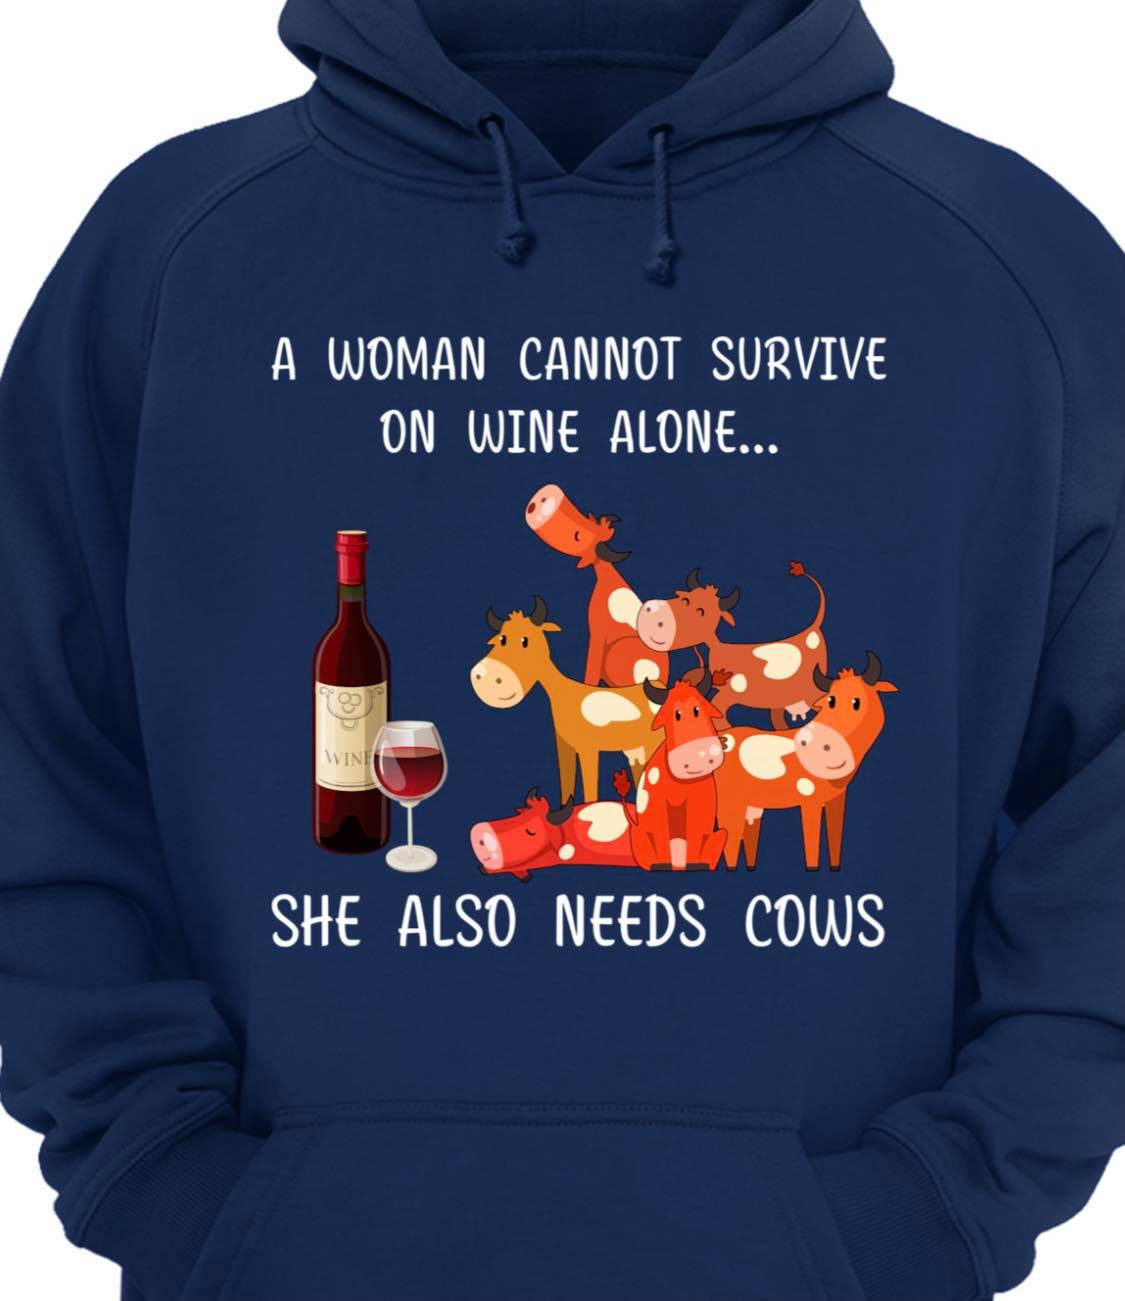 A woman cannot survive on wine alone she also needs cows - Cows and wine